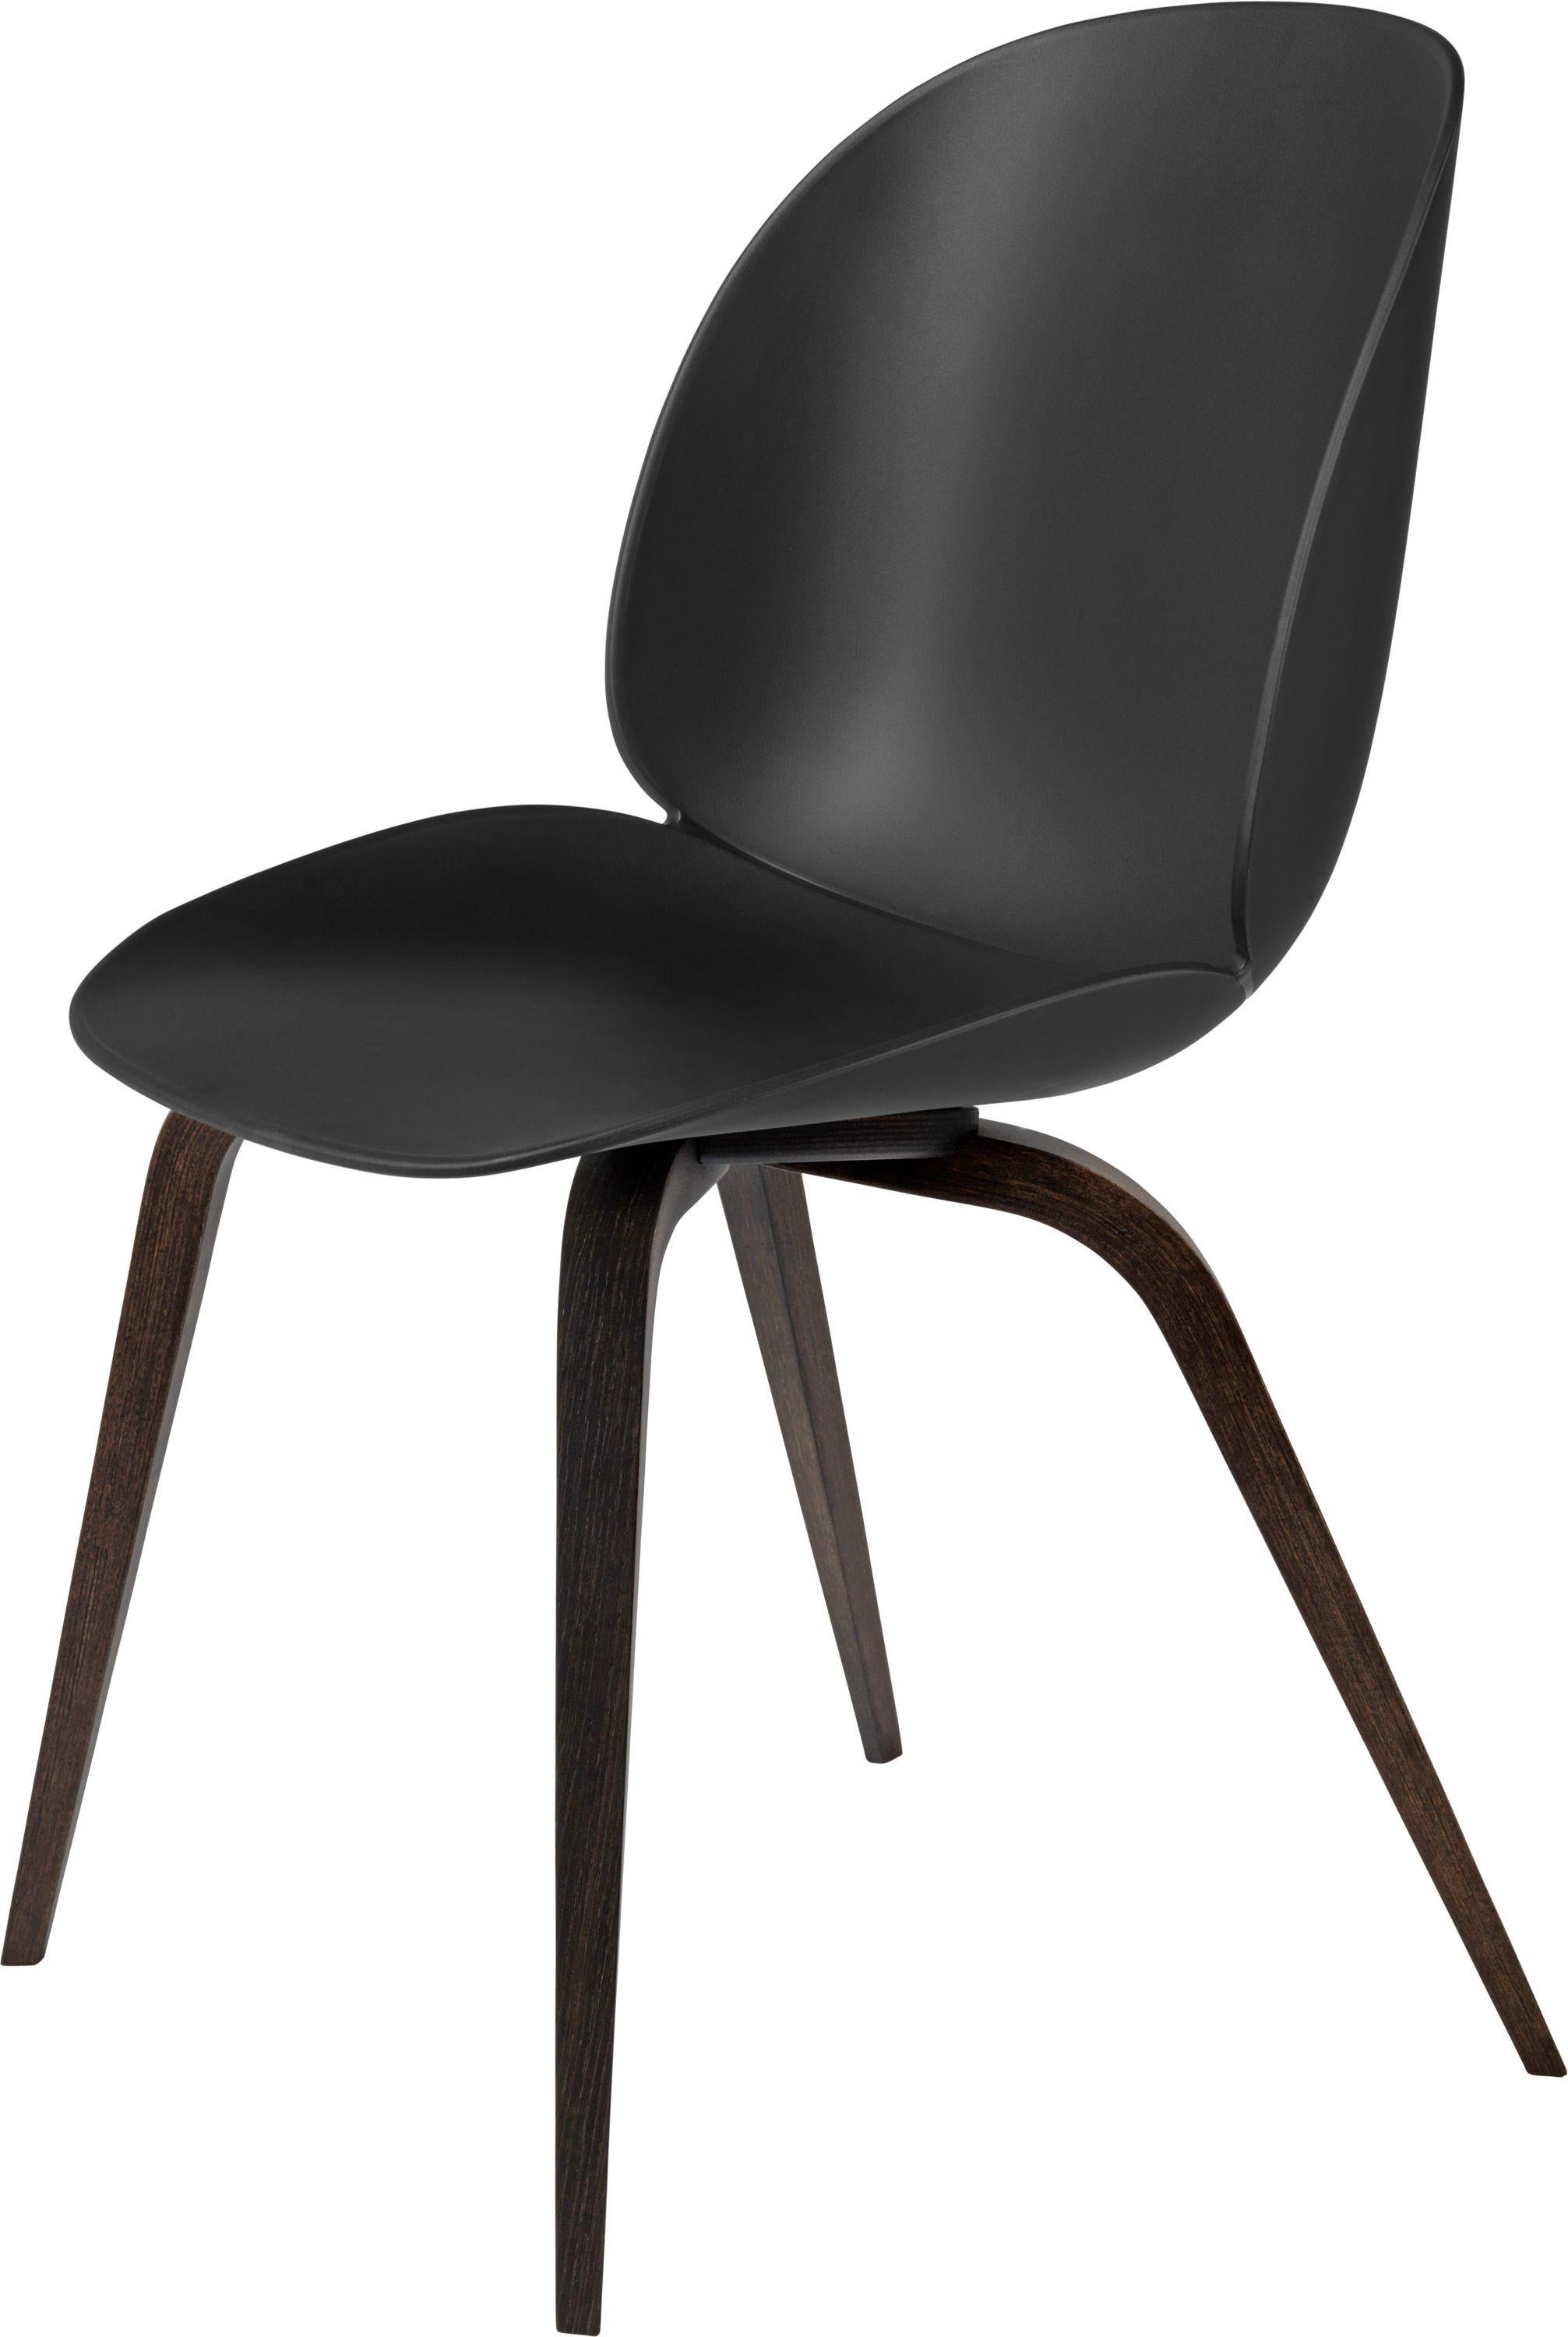 Contemporary GamFratesi 'Beetle' Dining Chair with Smoked Oak Conic Base